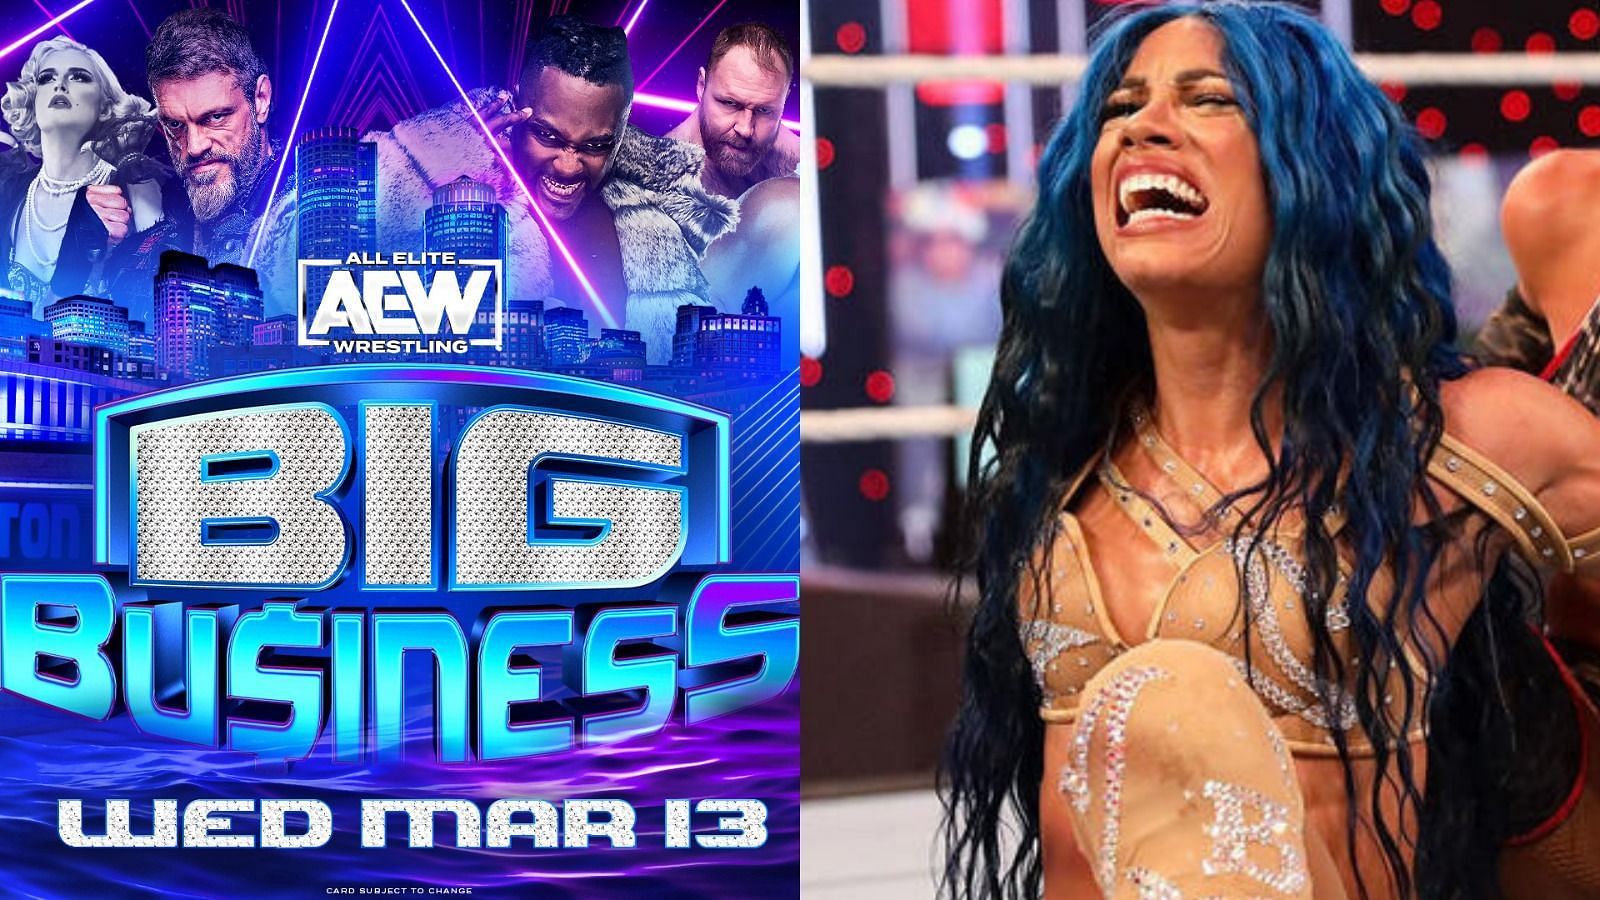 A list of everything that could happen if Mercedes Mone debuts at Big Business [Image Source: AEW.com and WWE.com]